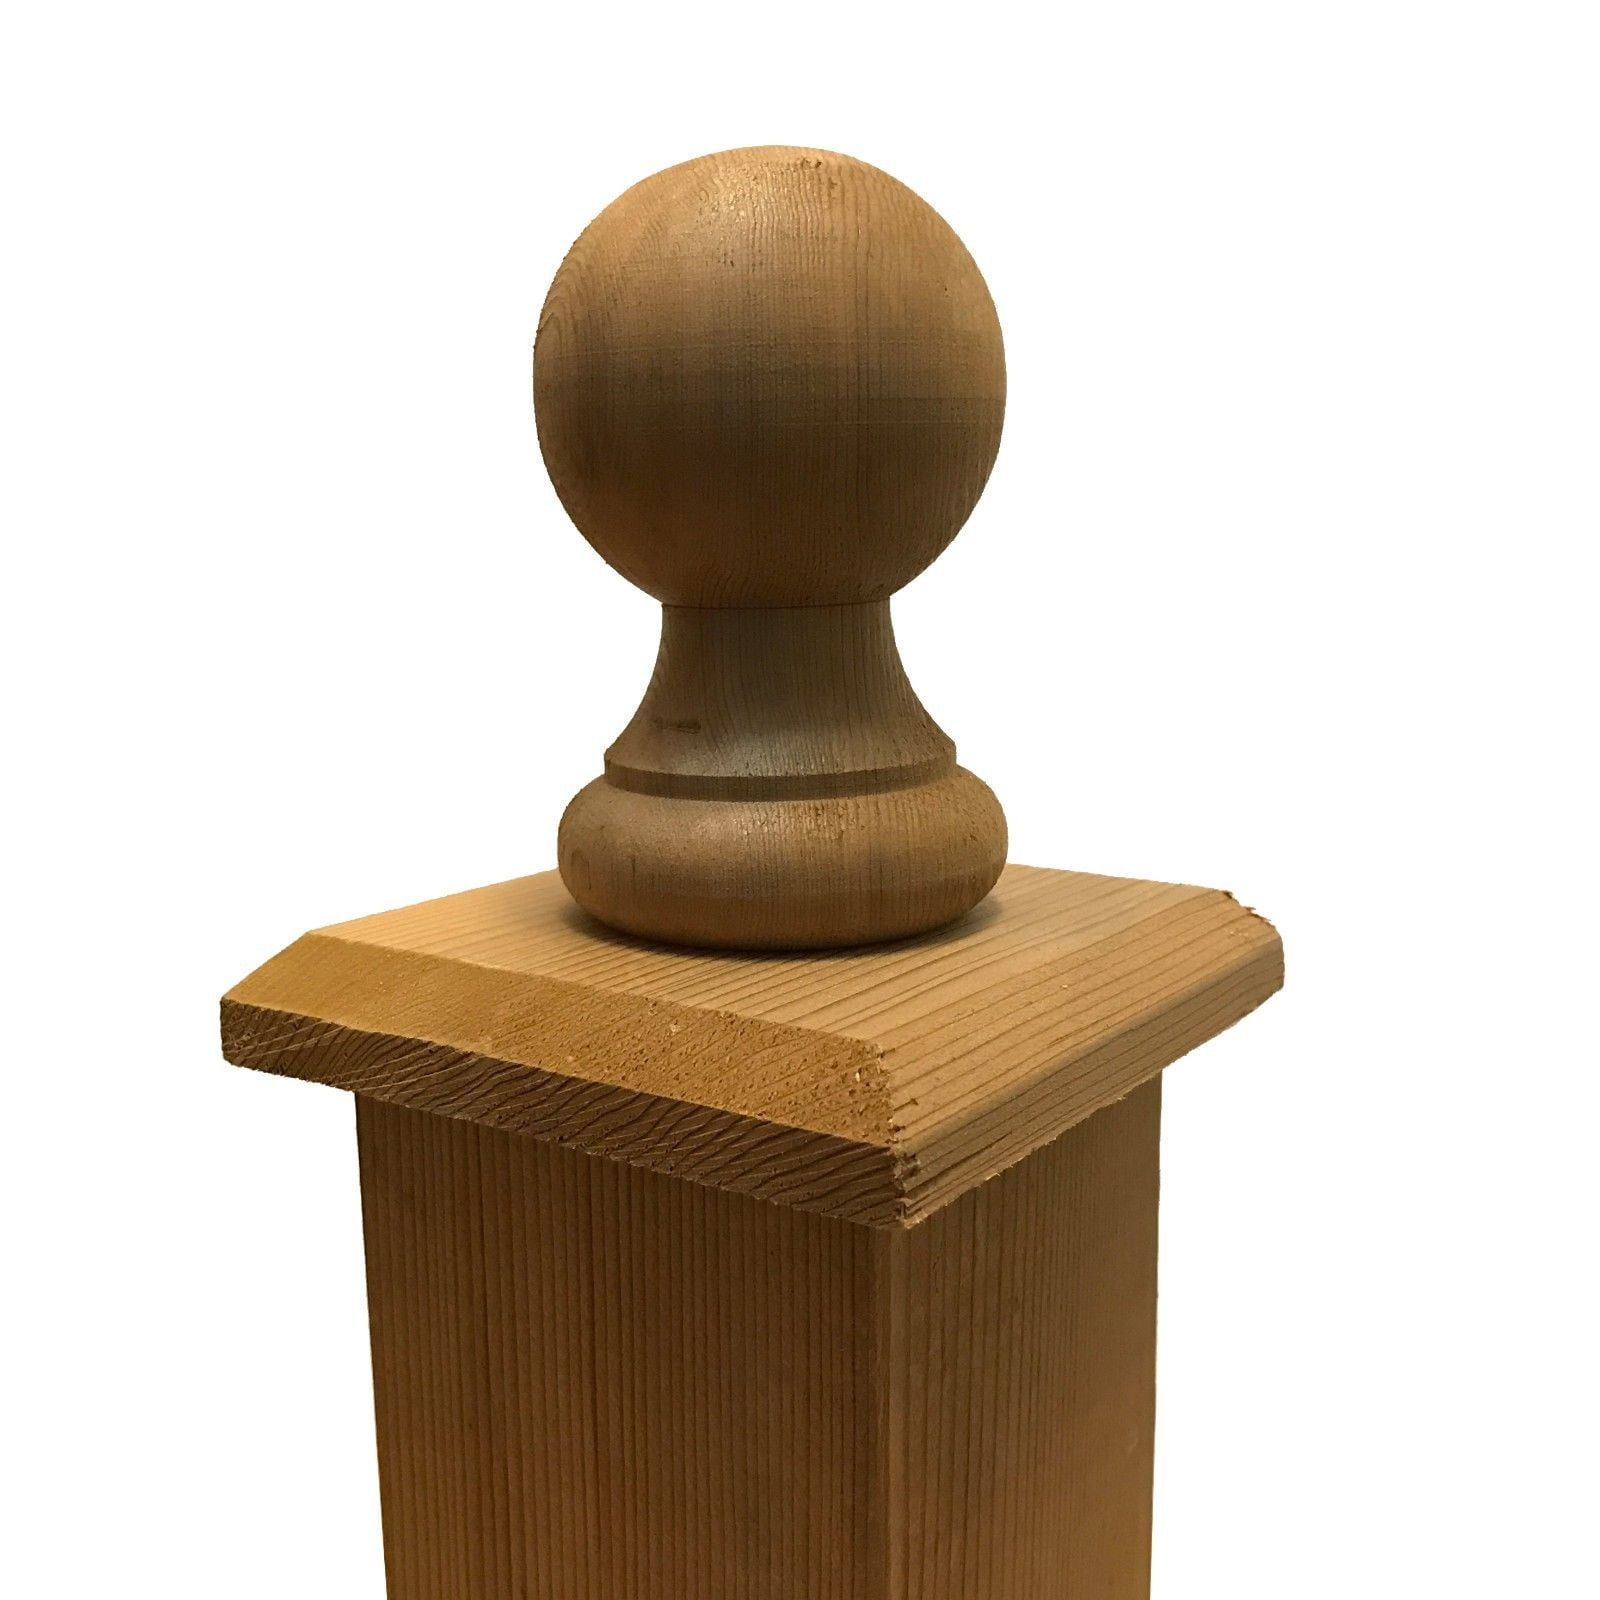 FENCE POST CAP TO SUIT 3" x 3" 75mm FENCE POSTS WOODEN FINIAL 3" 75mm BALL 